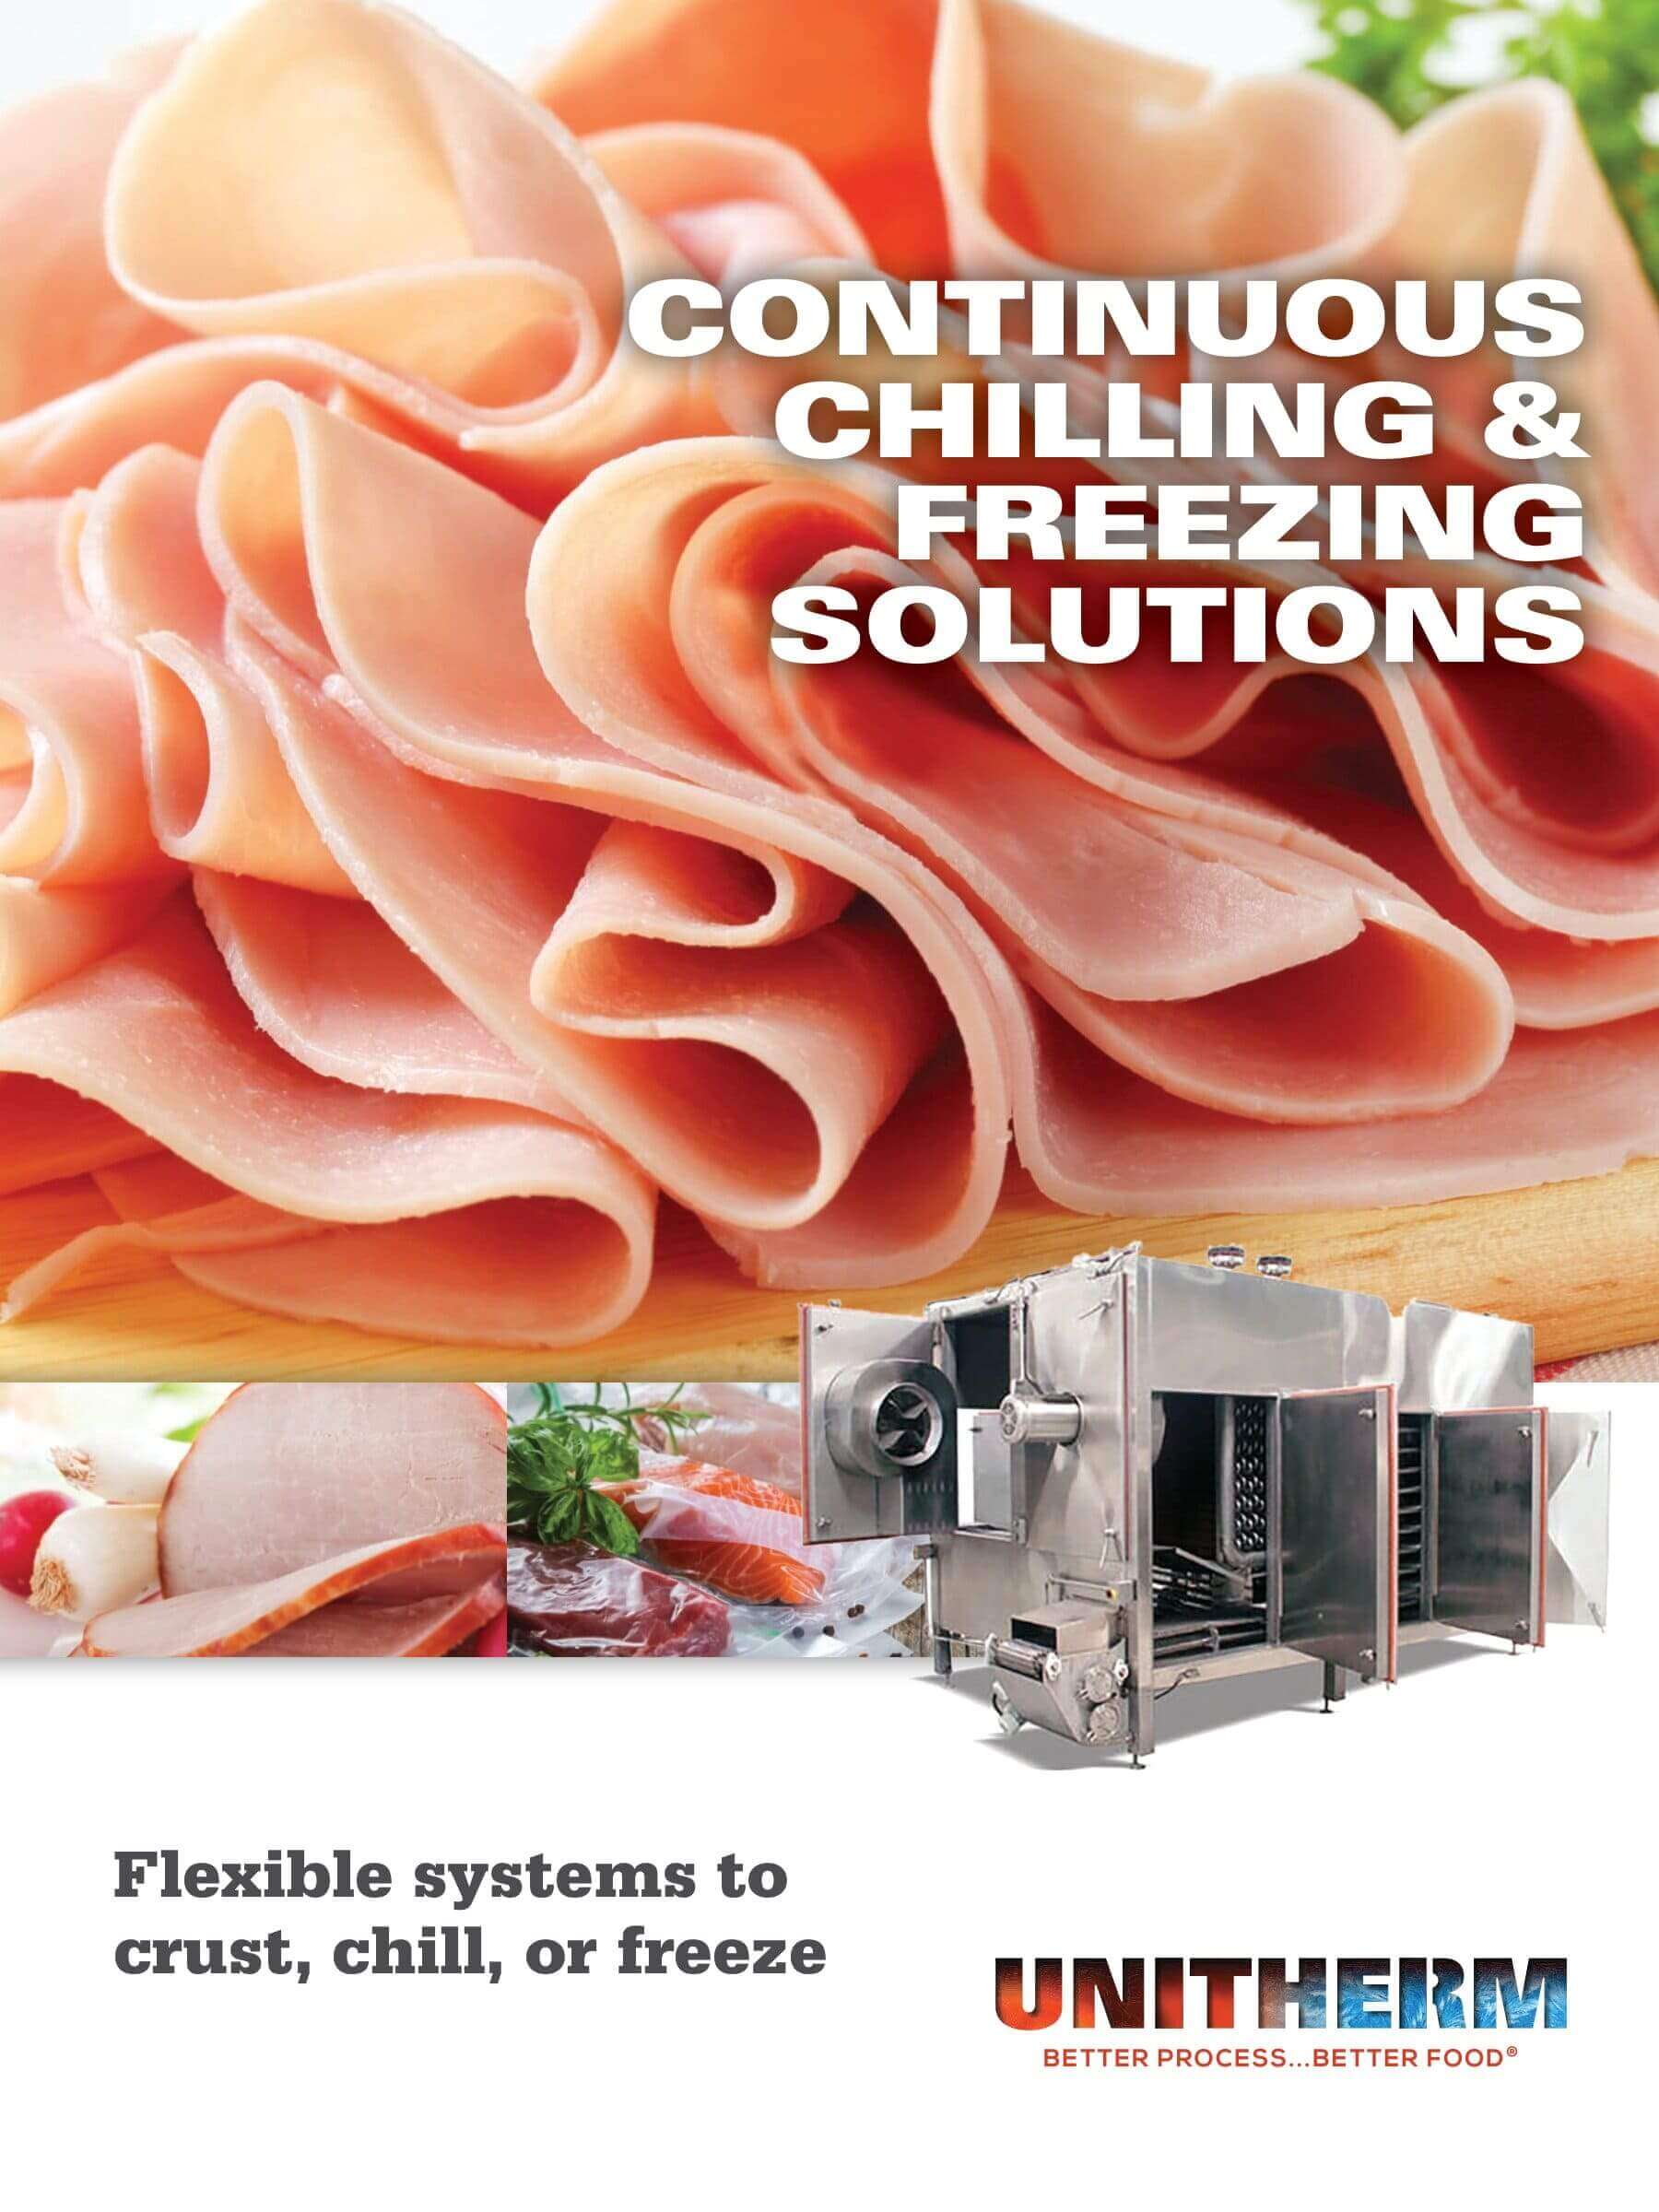 Unitherm Chilling And Freezing Solutions Brochure